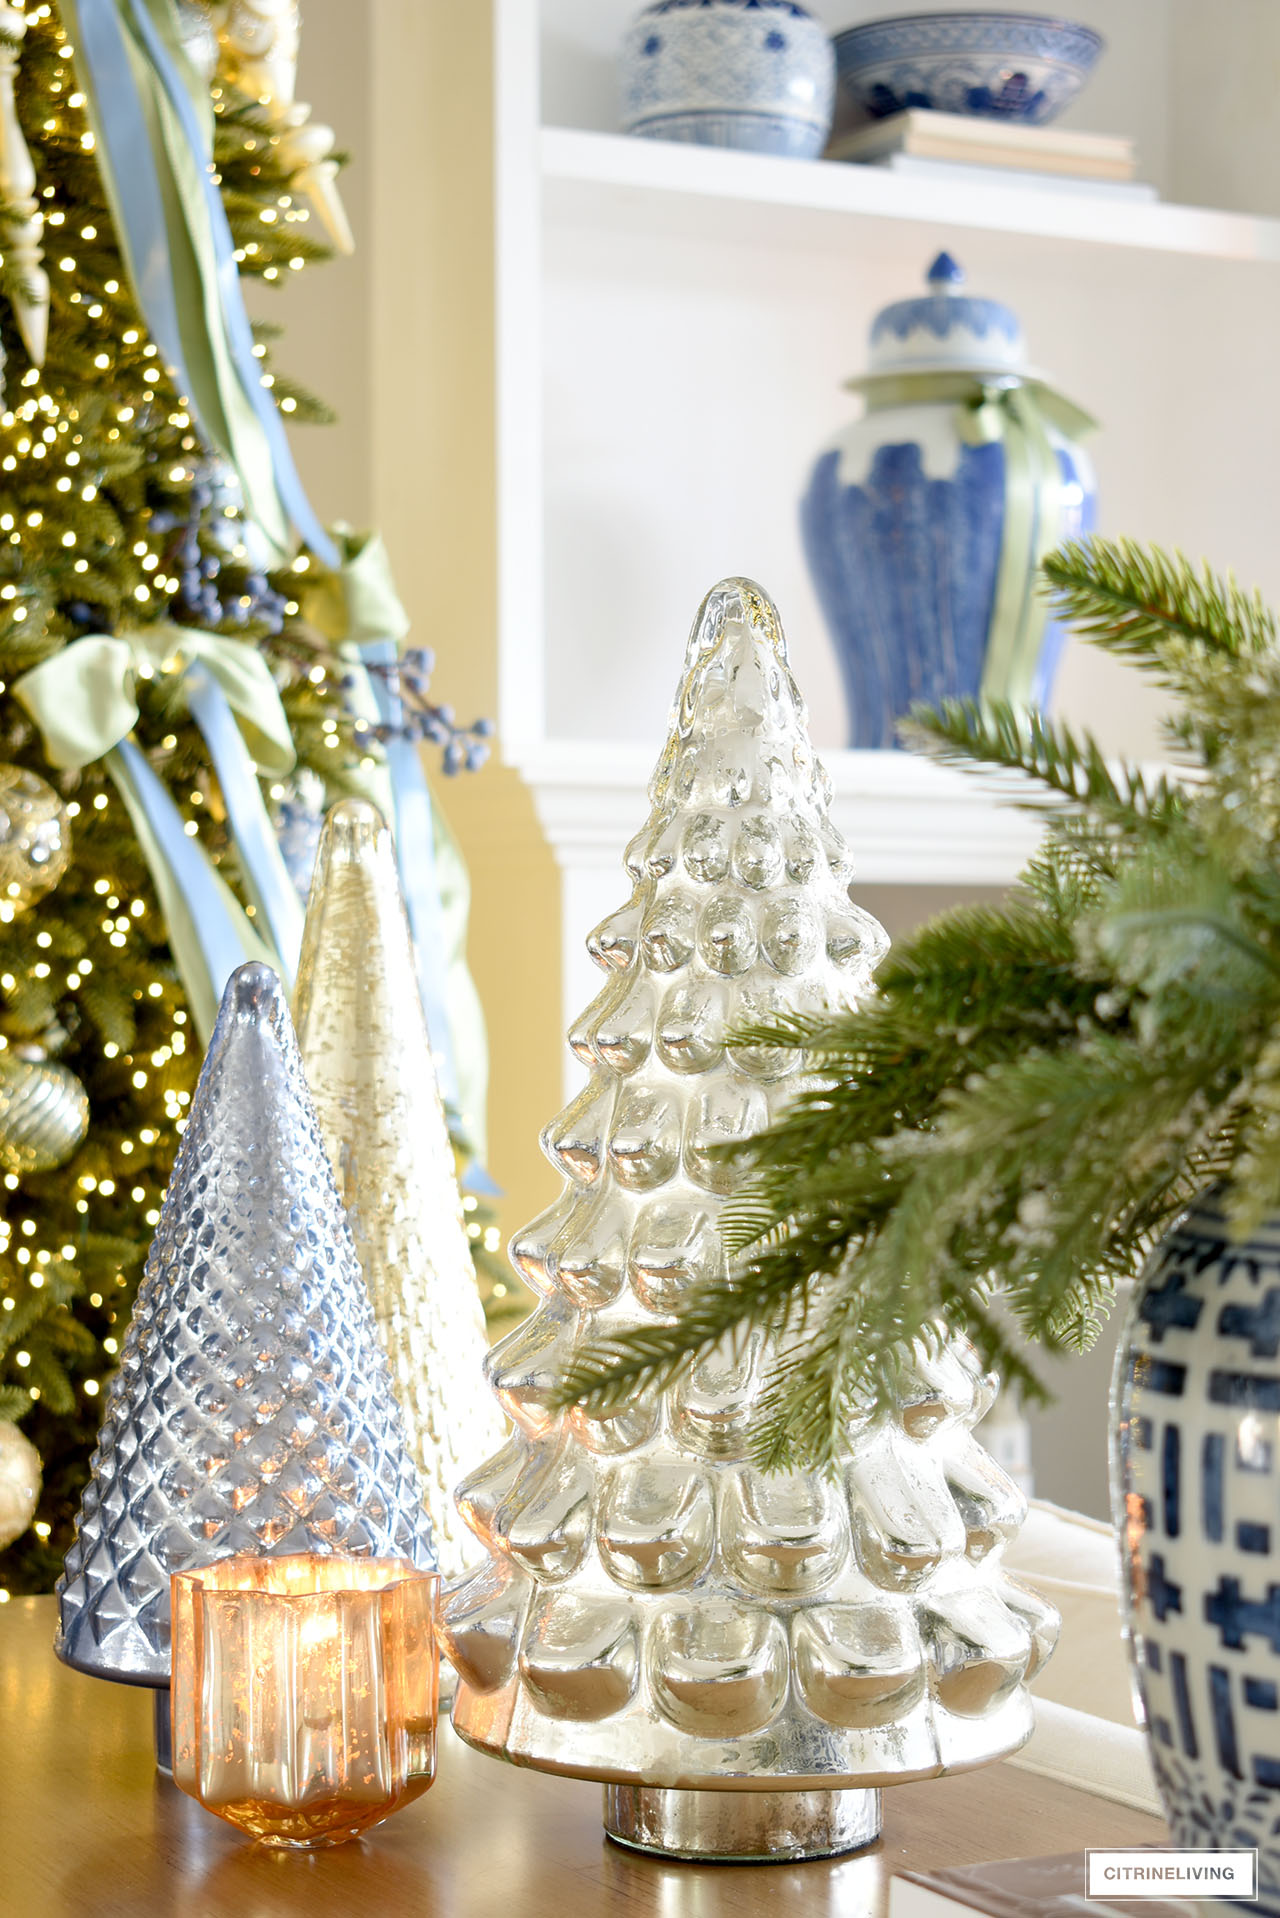 Mercury glass Christmas trees in silver, blue, gold and green with a greenery arrangement in a blue and white ginger jar.